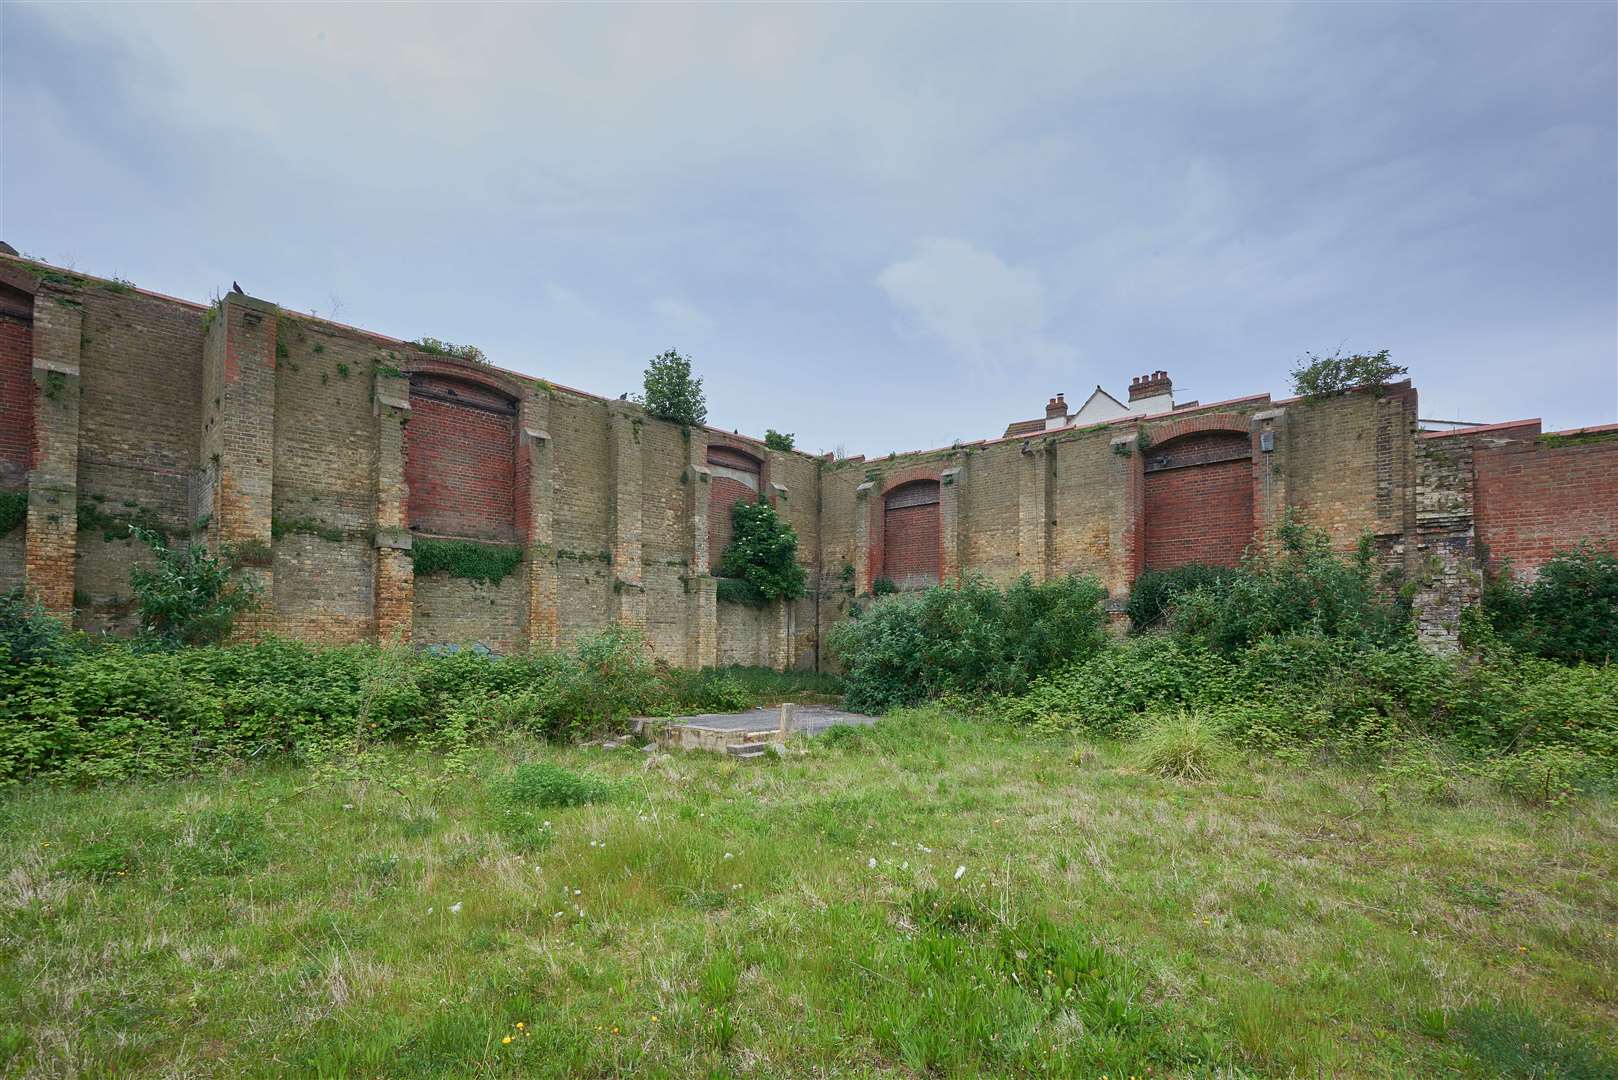 Land at the former Folkestone gas works site is currently